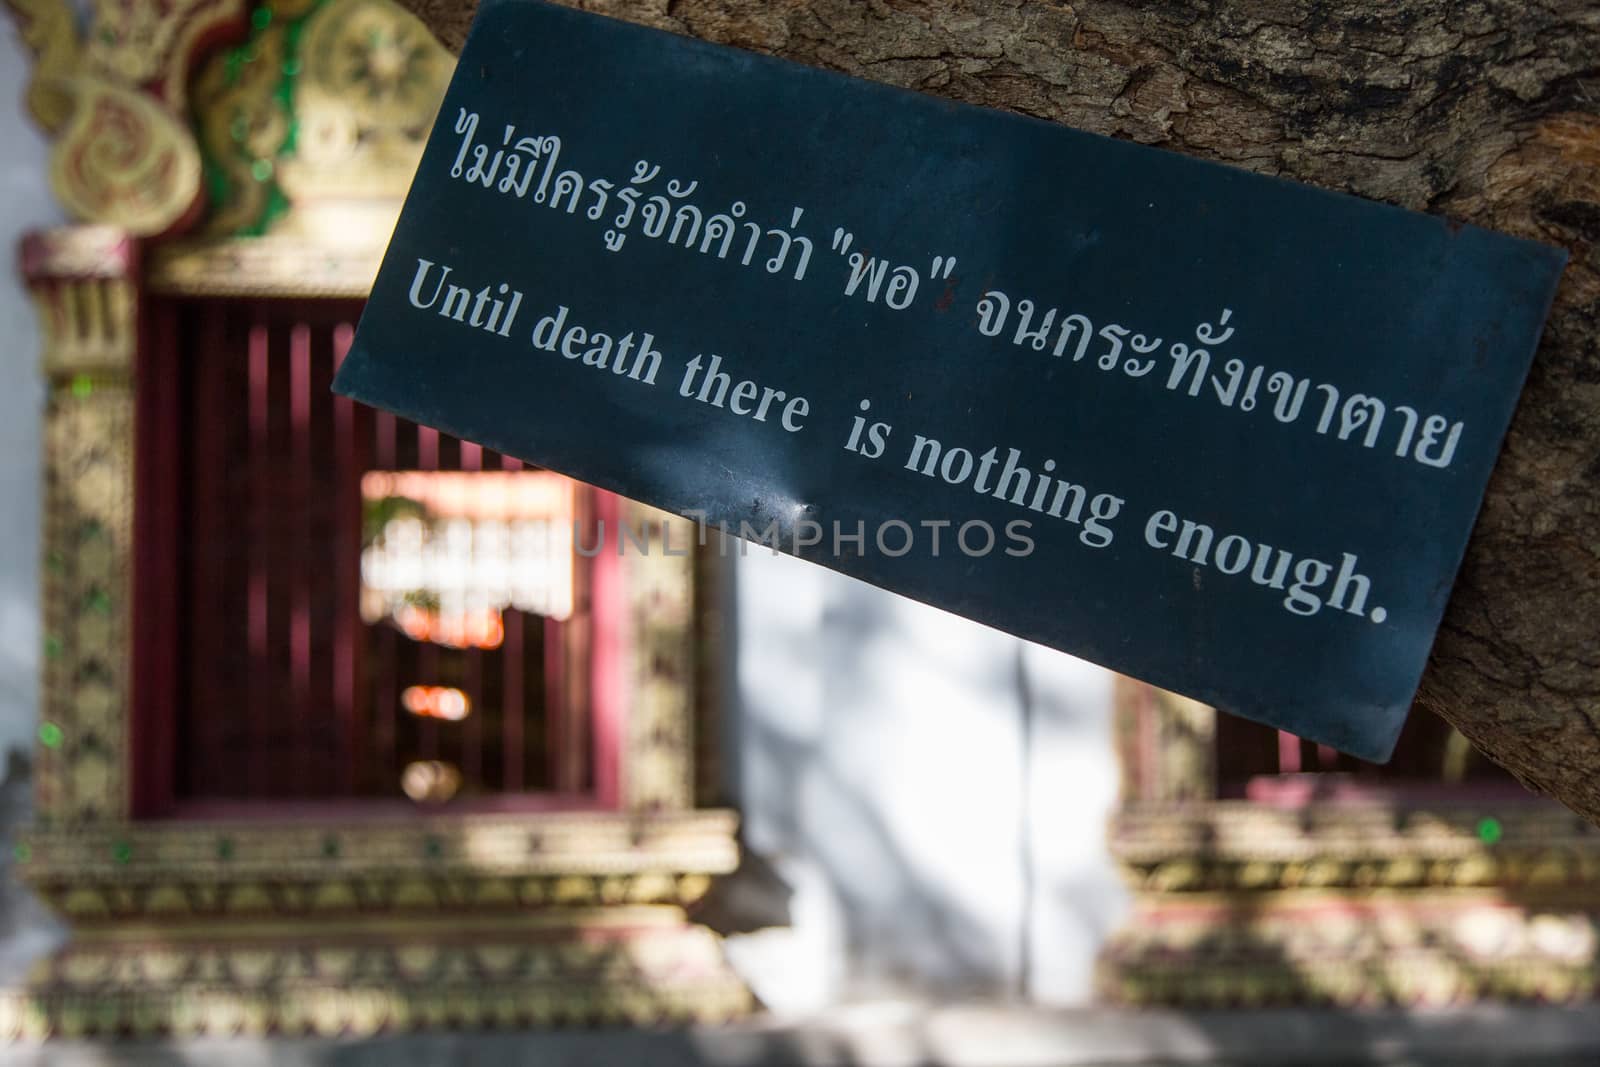 Until Death There Is Nothing saying by Buddha on sign temple garden Chiang Mai by kgboxford